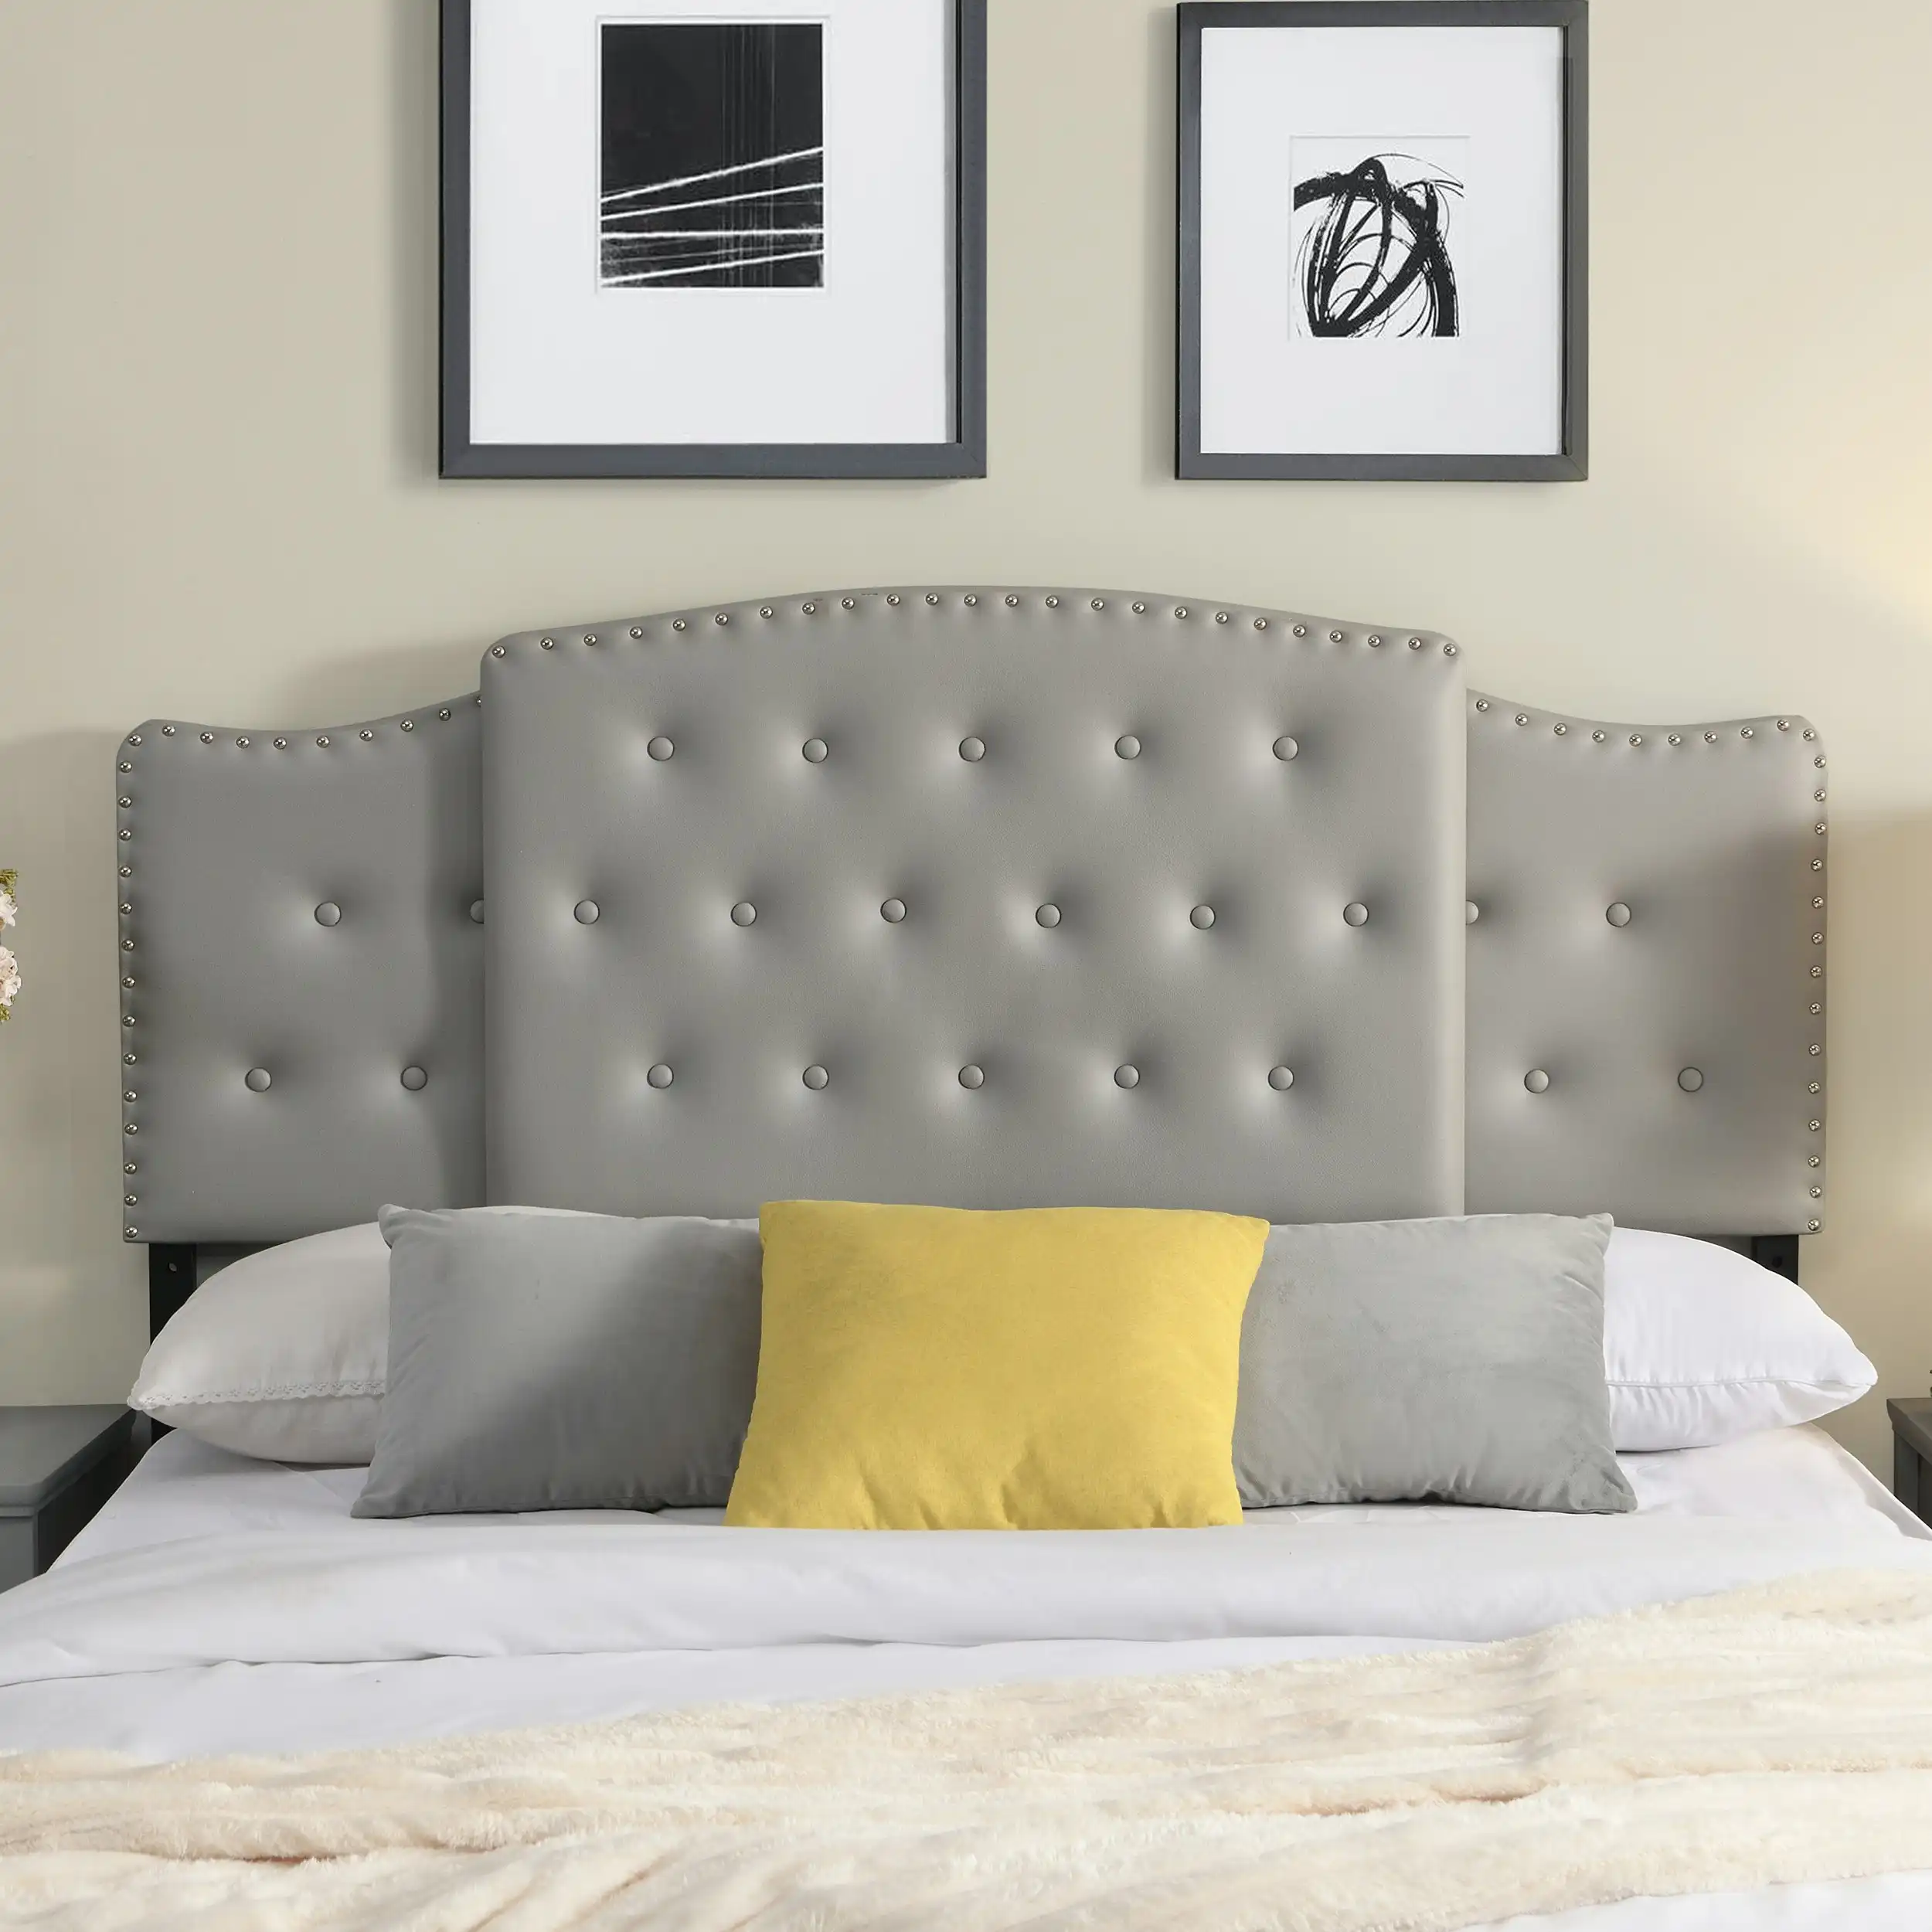 IHOMDEC Upholstered Size 3 In 1 Bed Headboard 3 levels for Height & Width Adjustment Grey